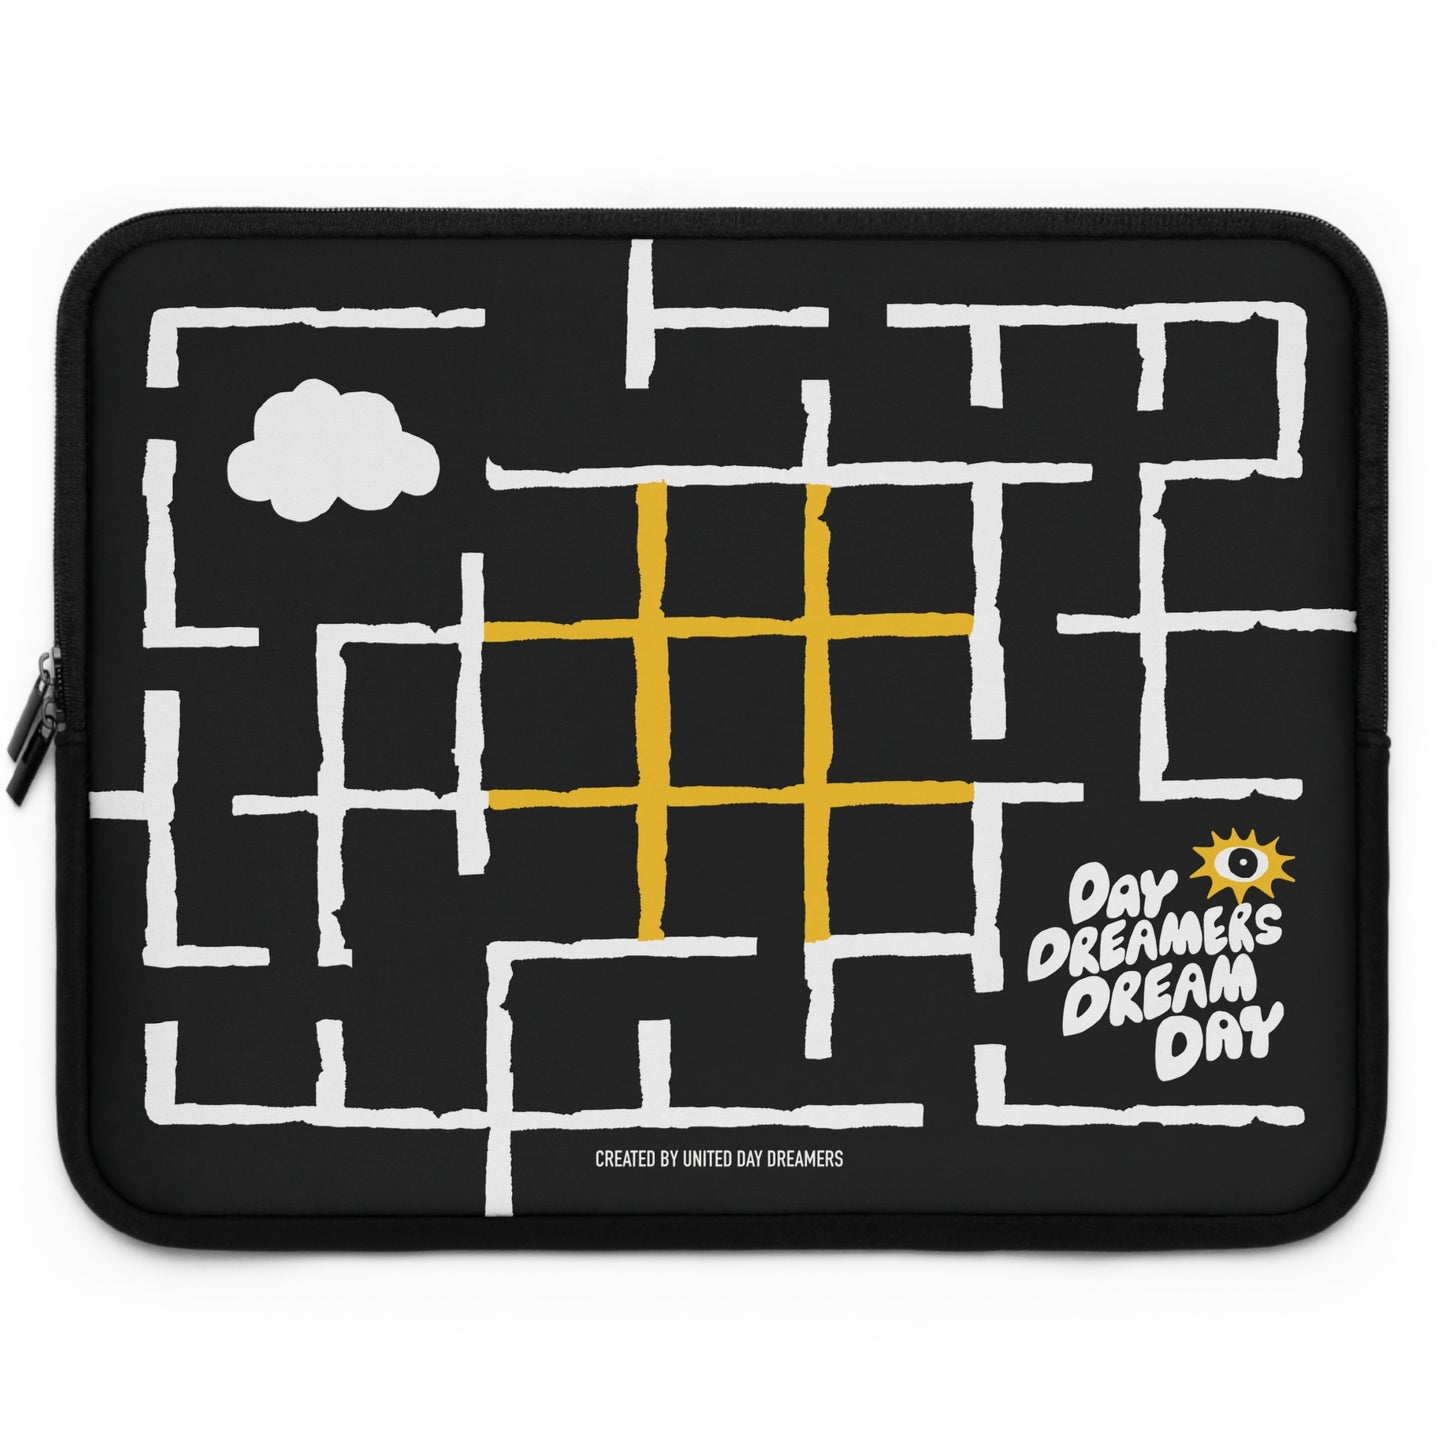 Day Dreamers Dream Day Labyrinth Laptop Sleeve in Black